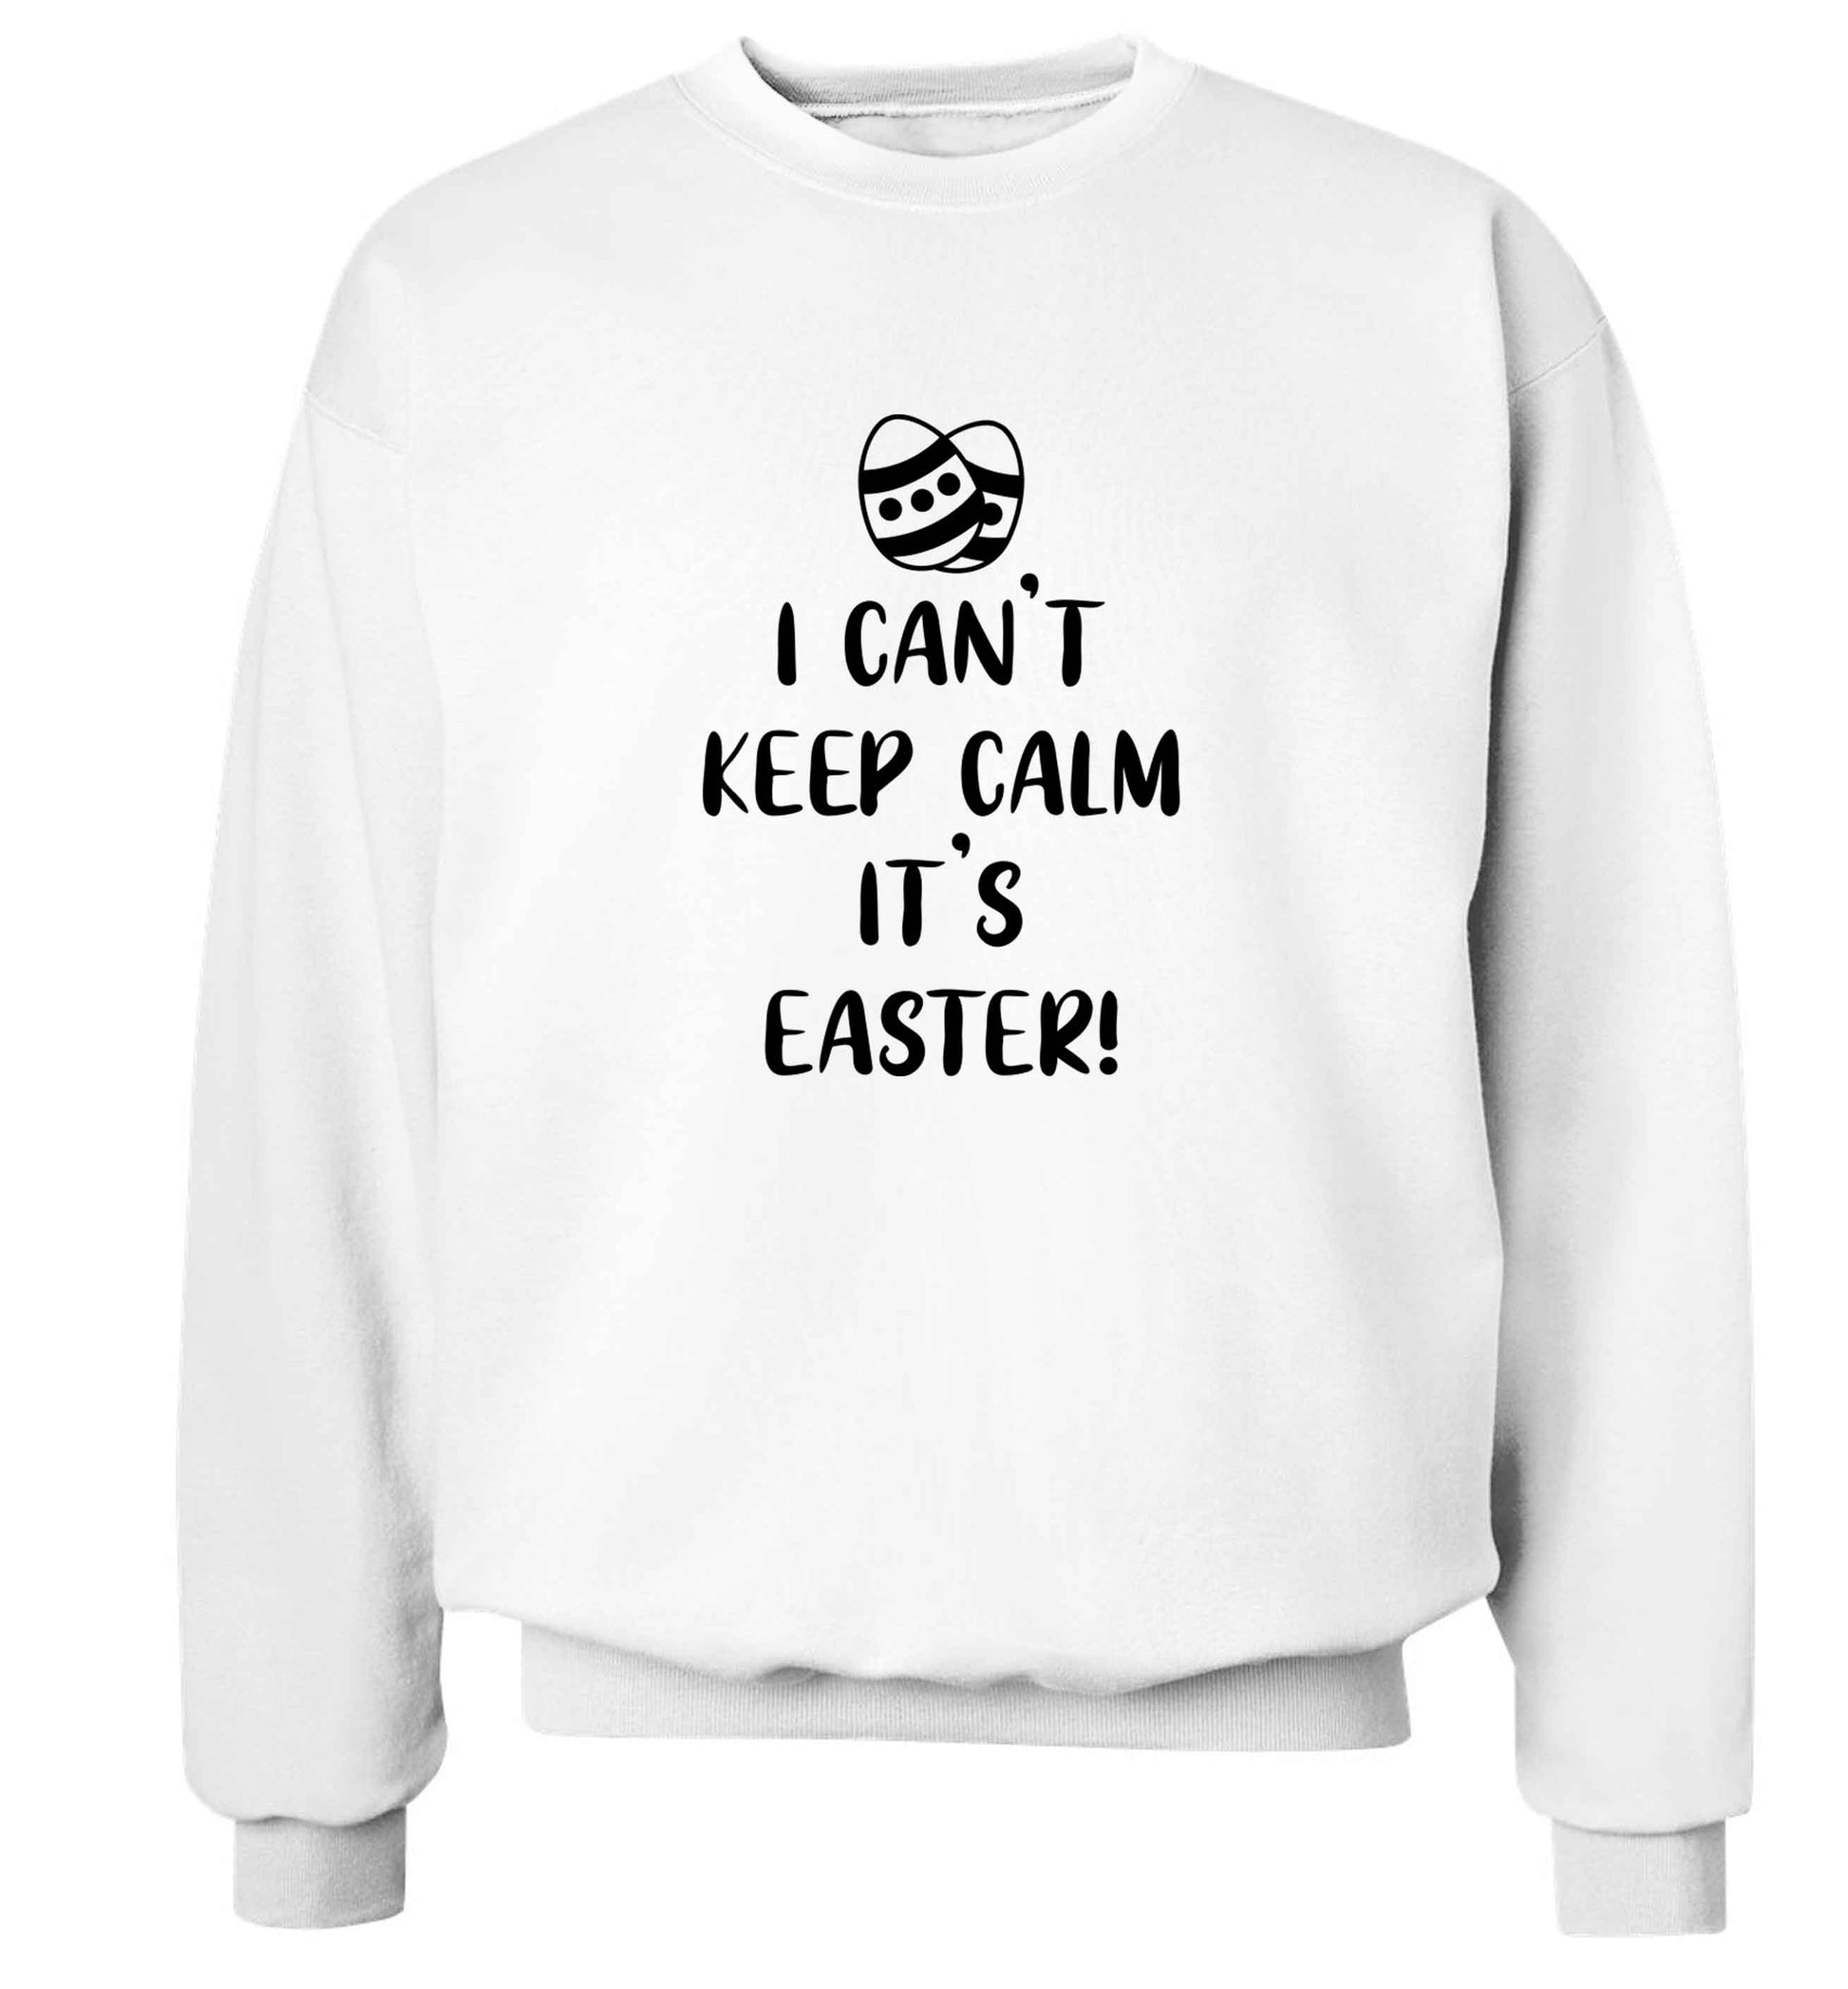 I can't keep calm it's Easter adult's unisex white sweater 2XL